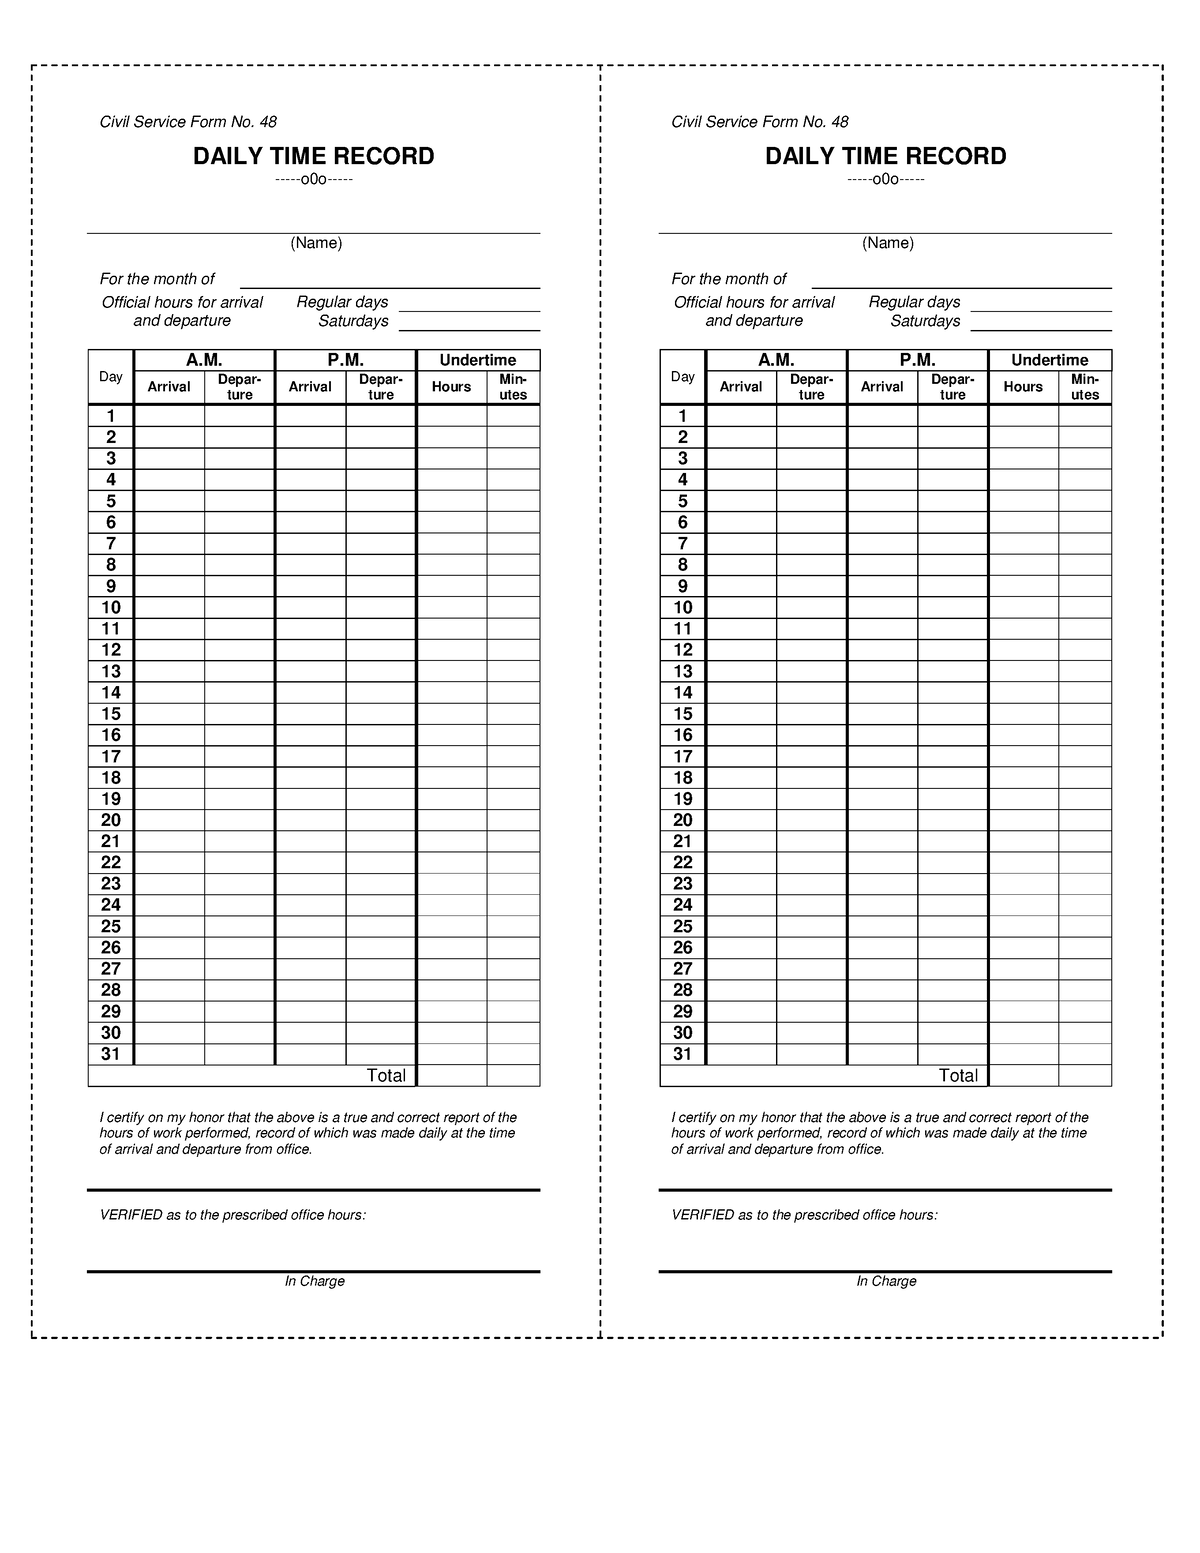 Pdfcoffee Sample DTR Form Civil Service Form No 48 DAILY TIME 